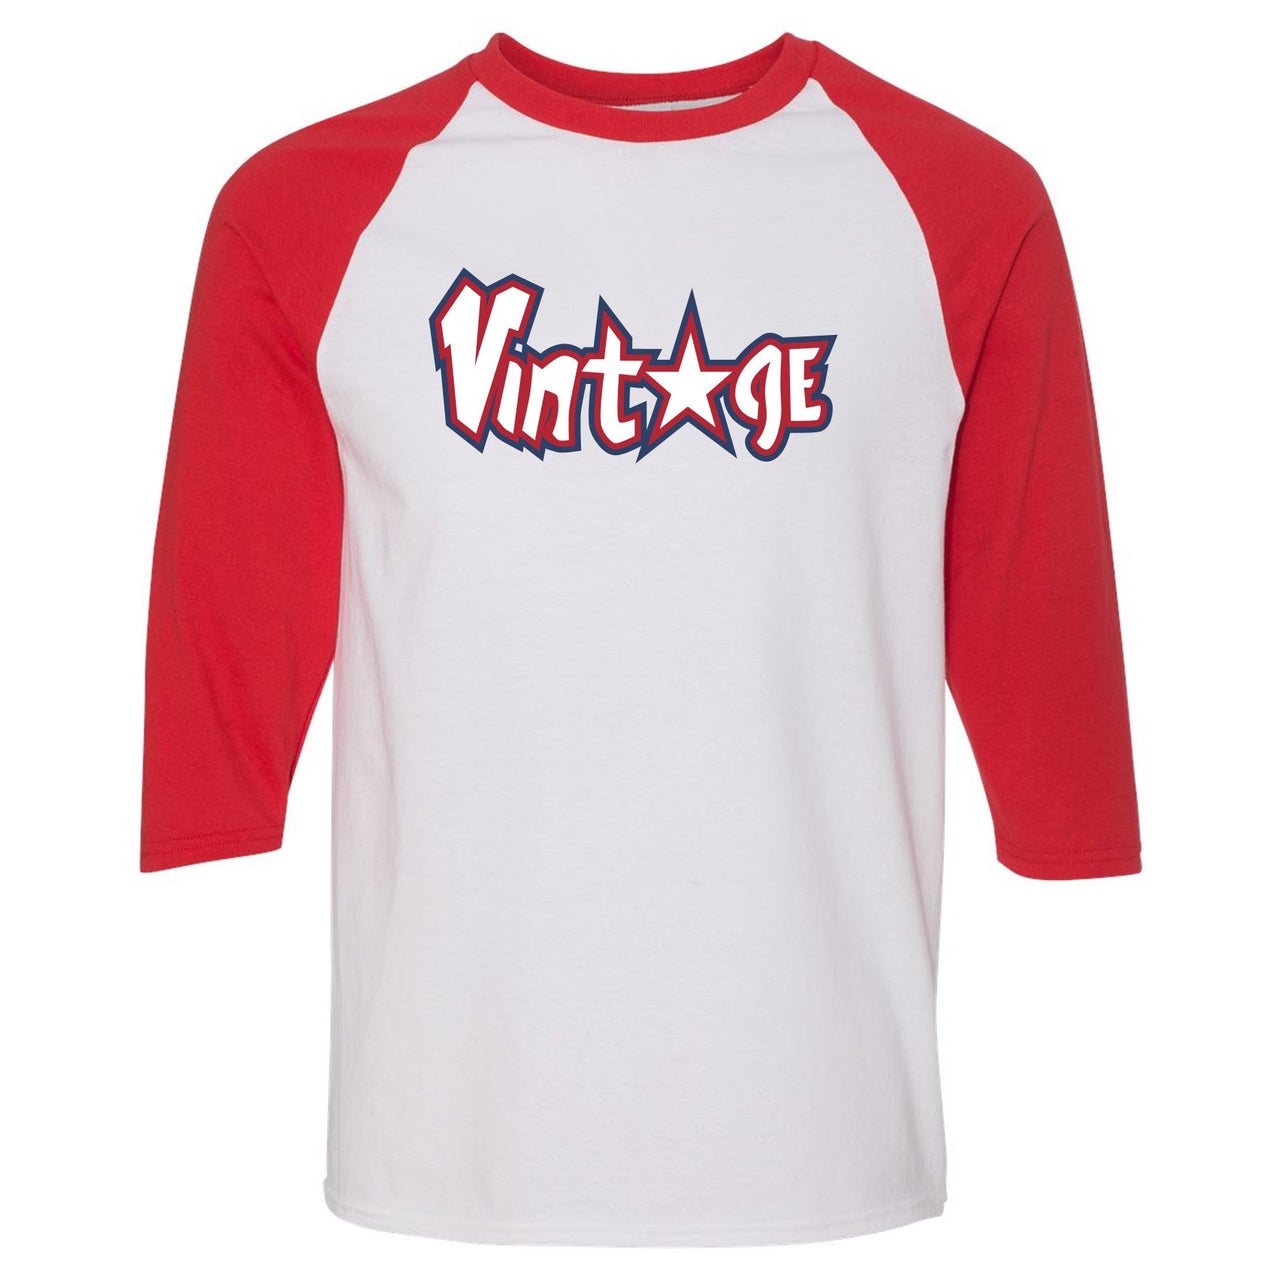 USA One Foams Raglan T Shirt | Vintage Star, White and Red